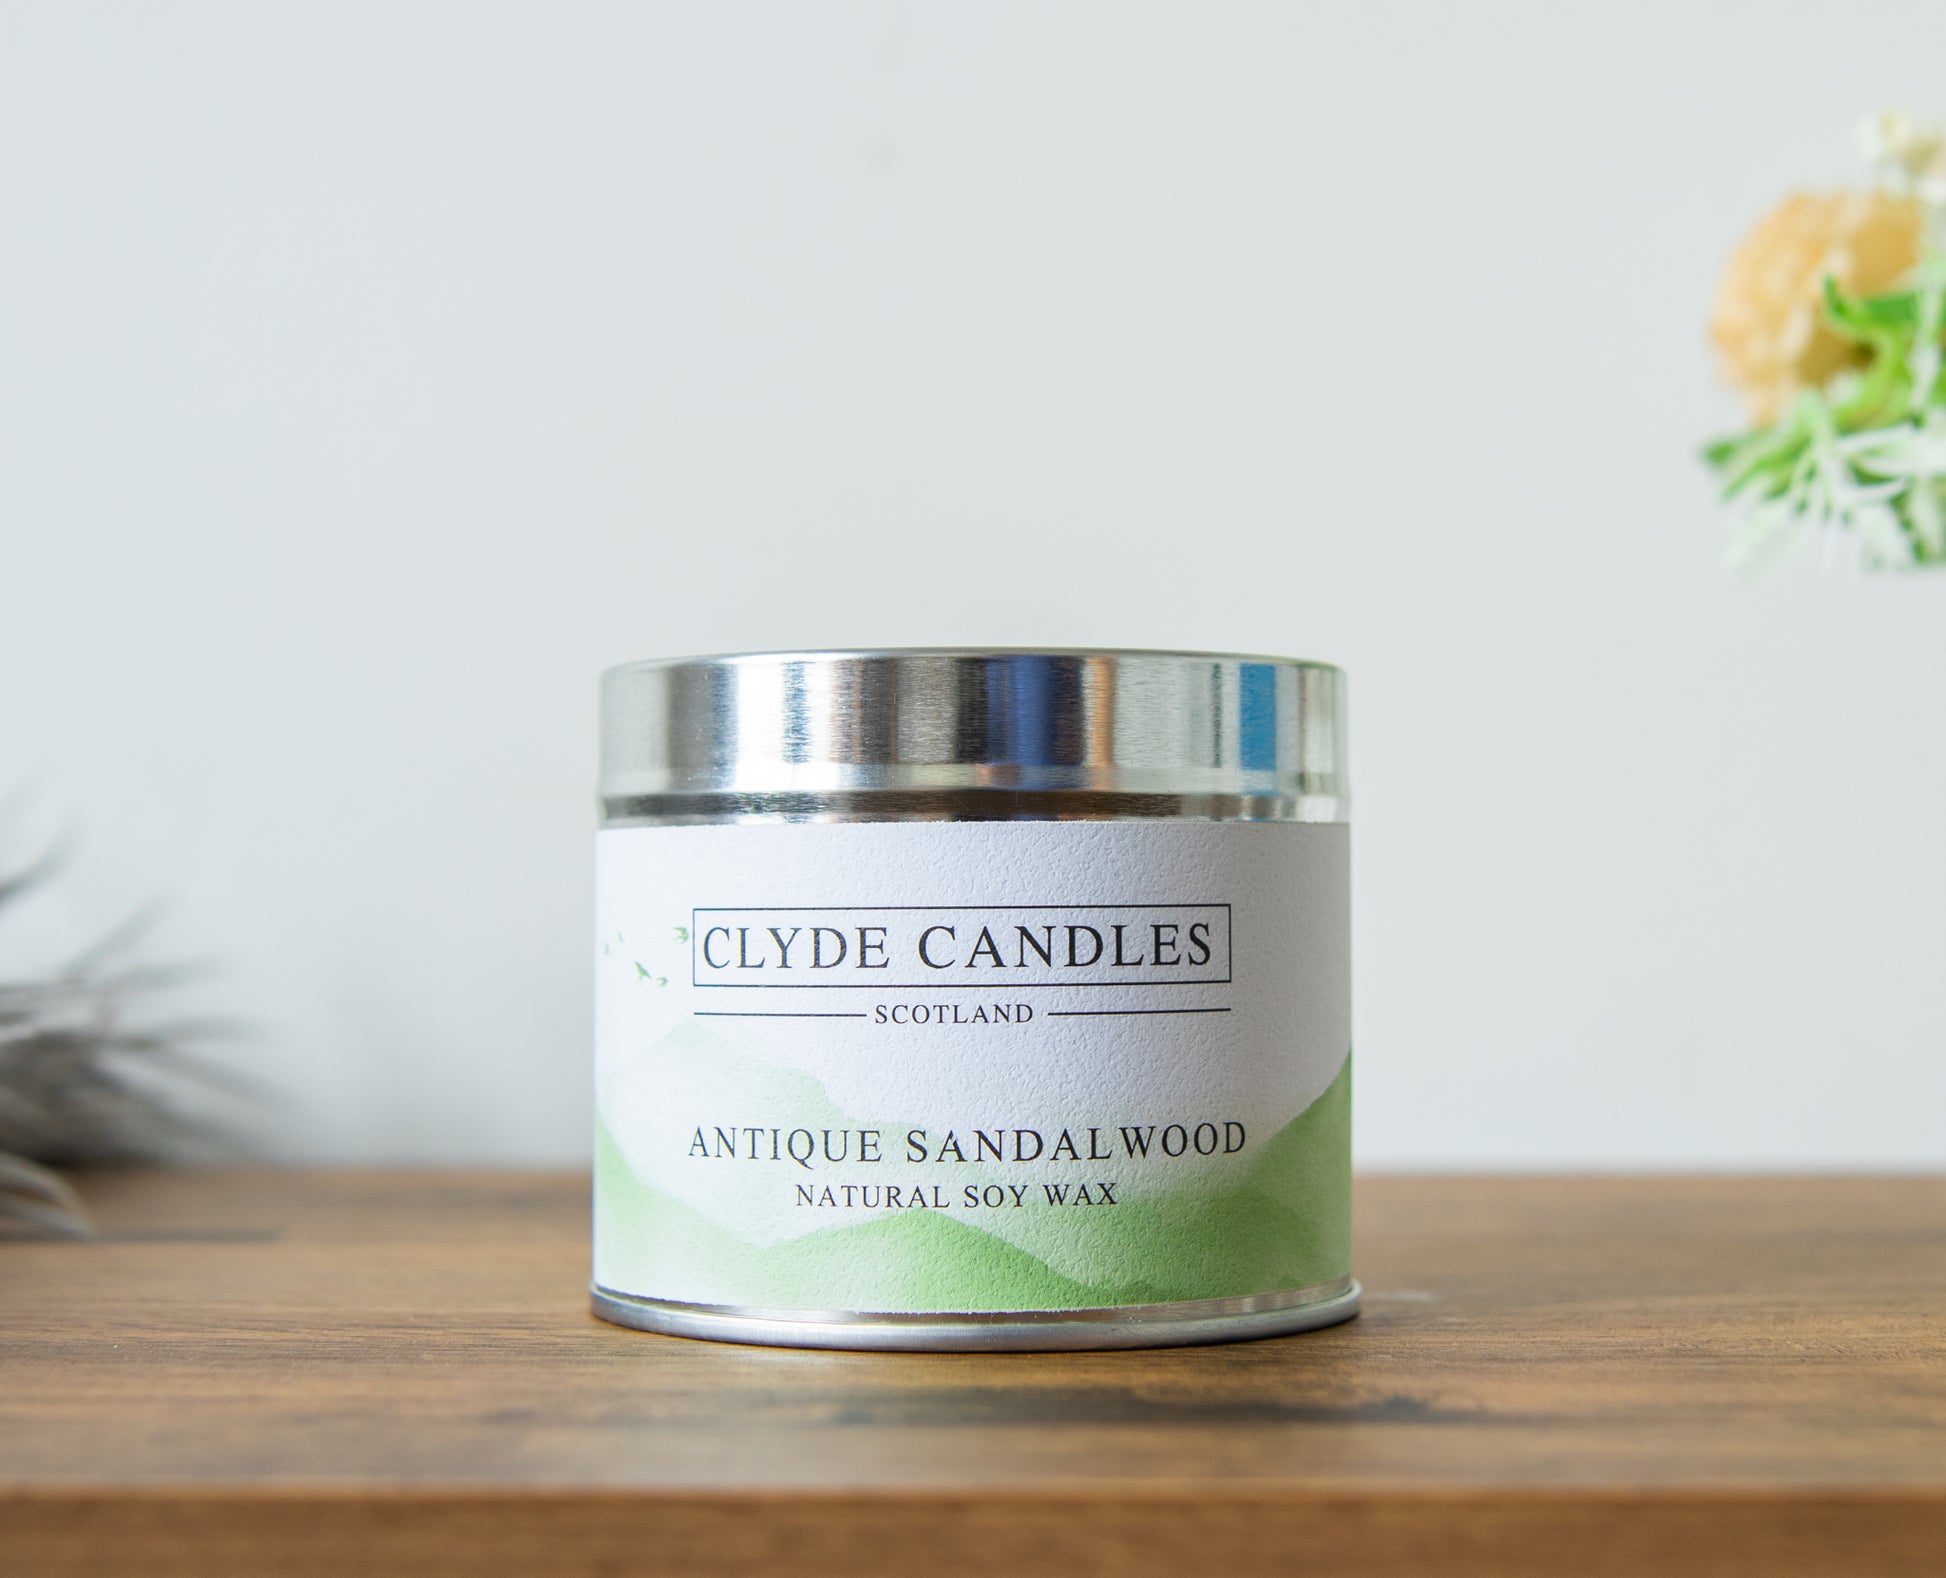 Antique Sandalwood Scented Candle Tin, Natural soy wax, Scottish Candles, Clyde Candles